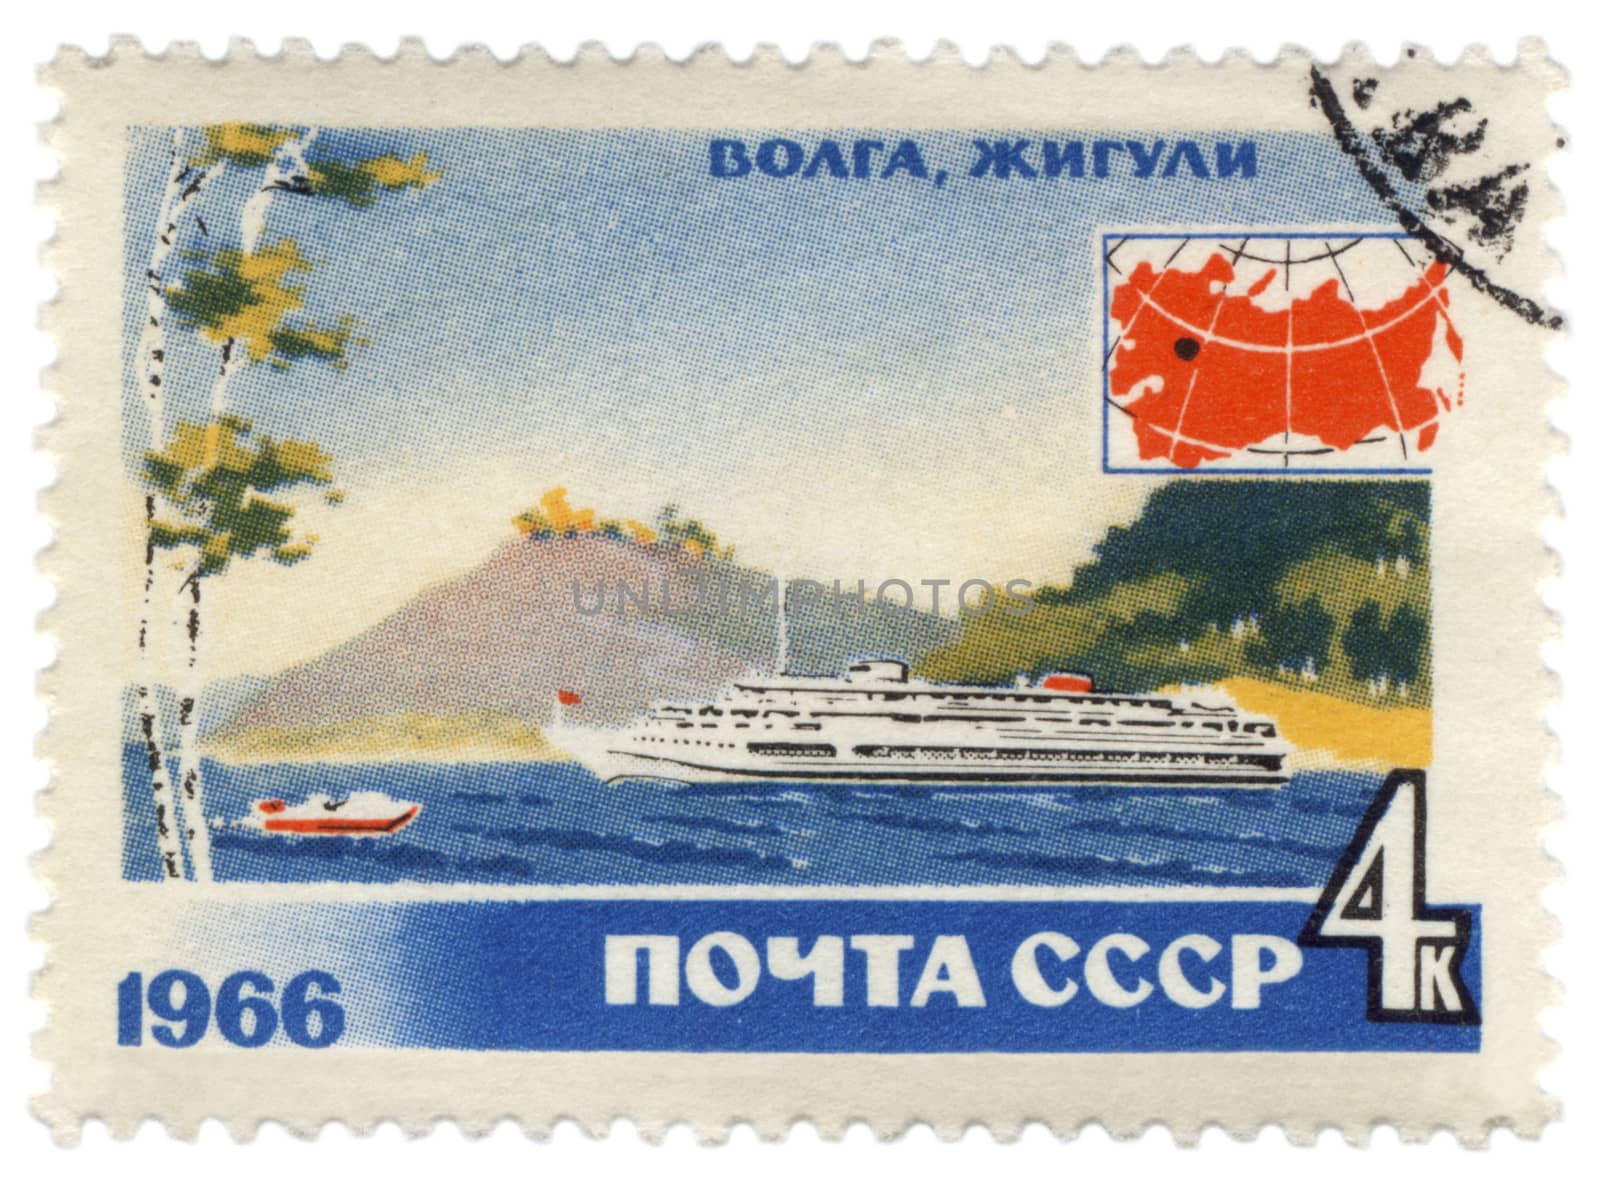 Volga river with passenger ship on post stamp by wander